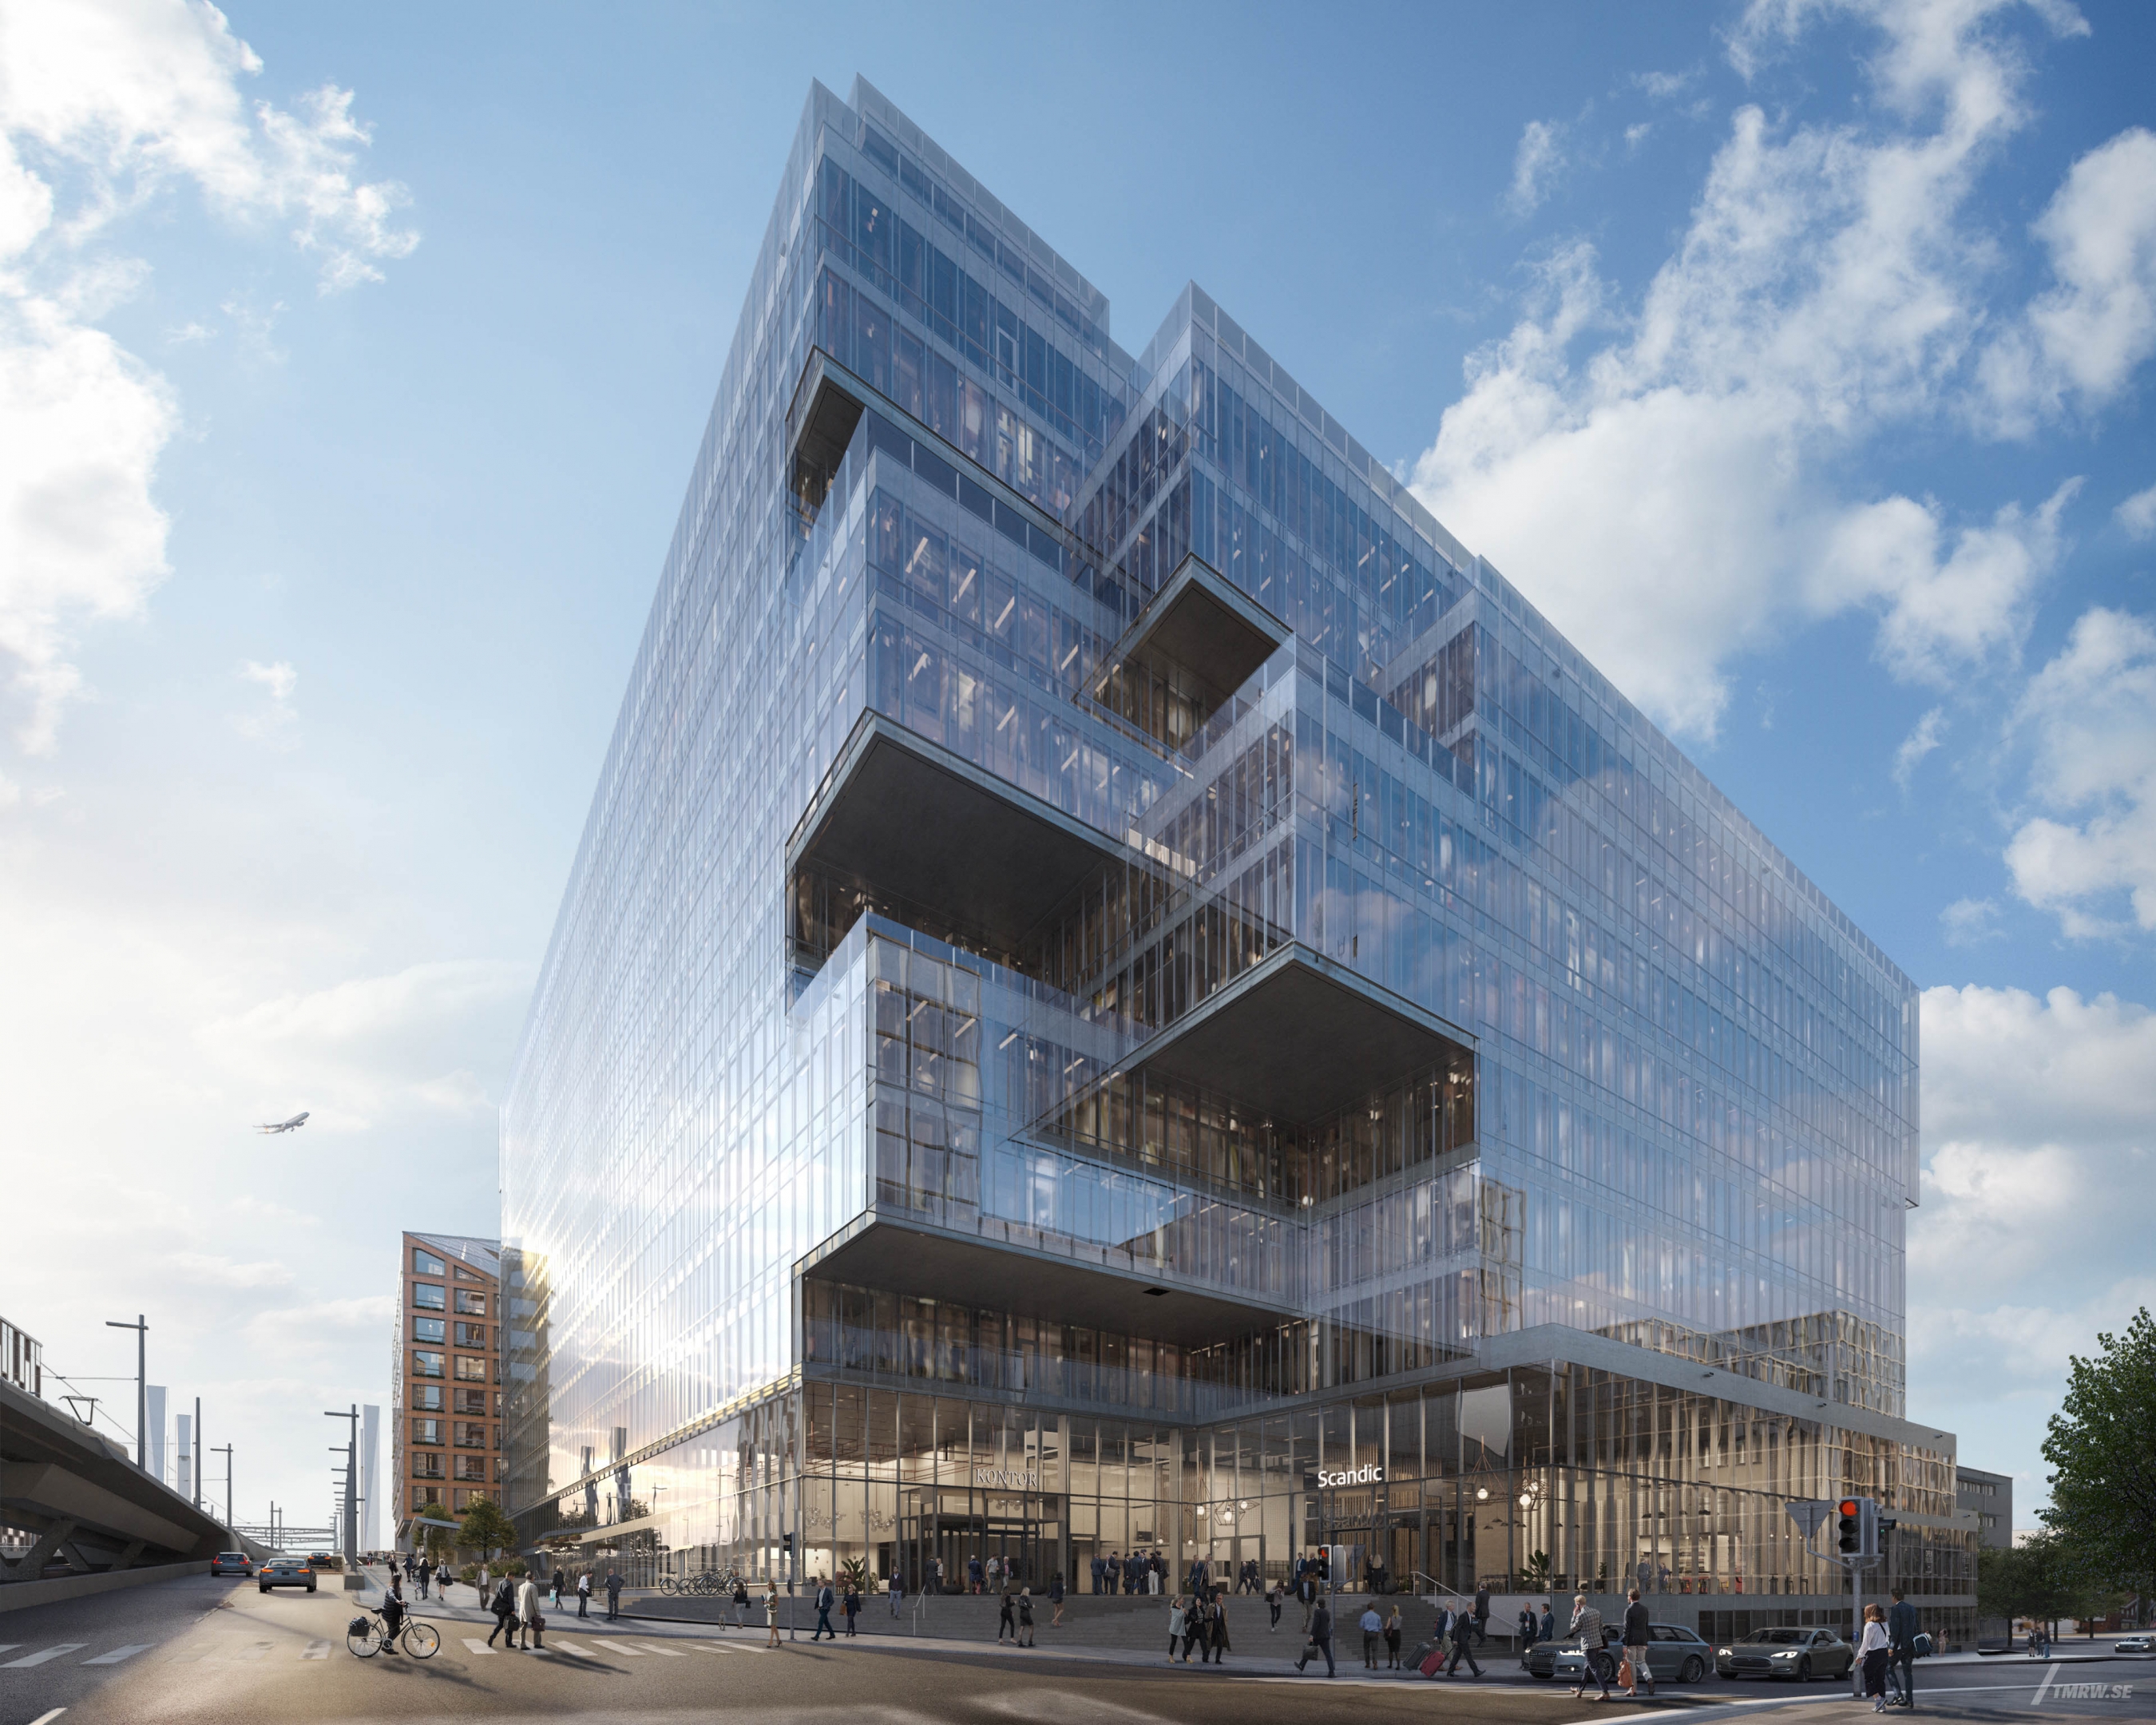 Architectural visualization of Platinan for Vasakronan, exterior of an office building in day light from a street view, location gothenburg